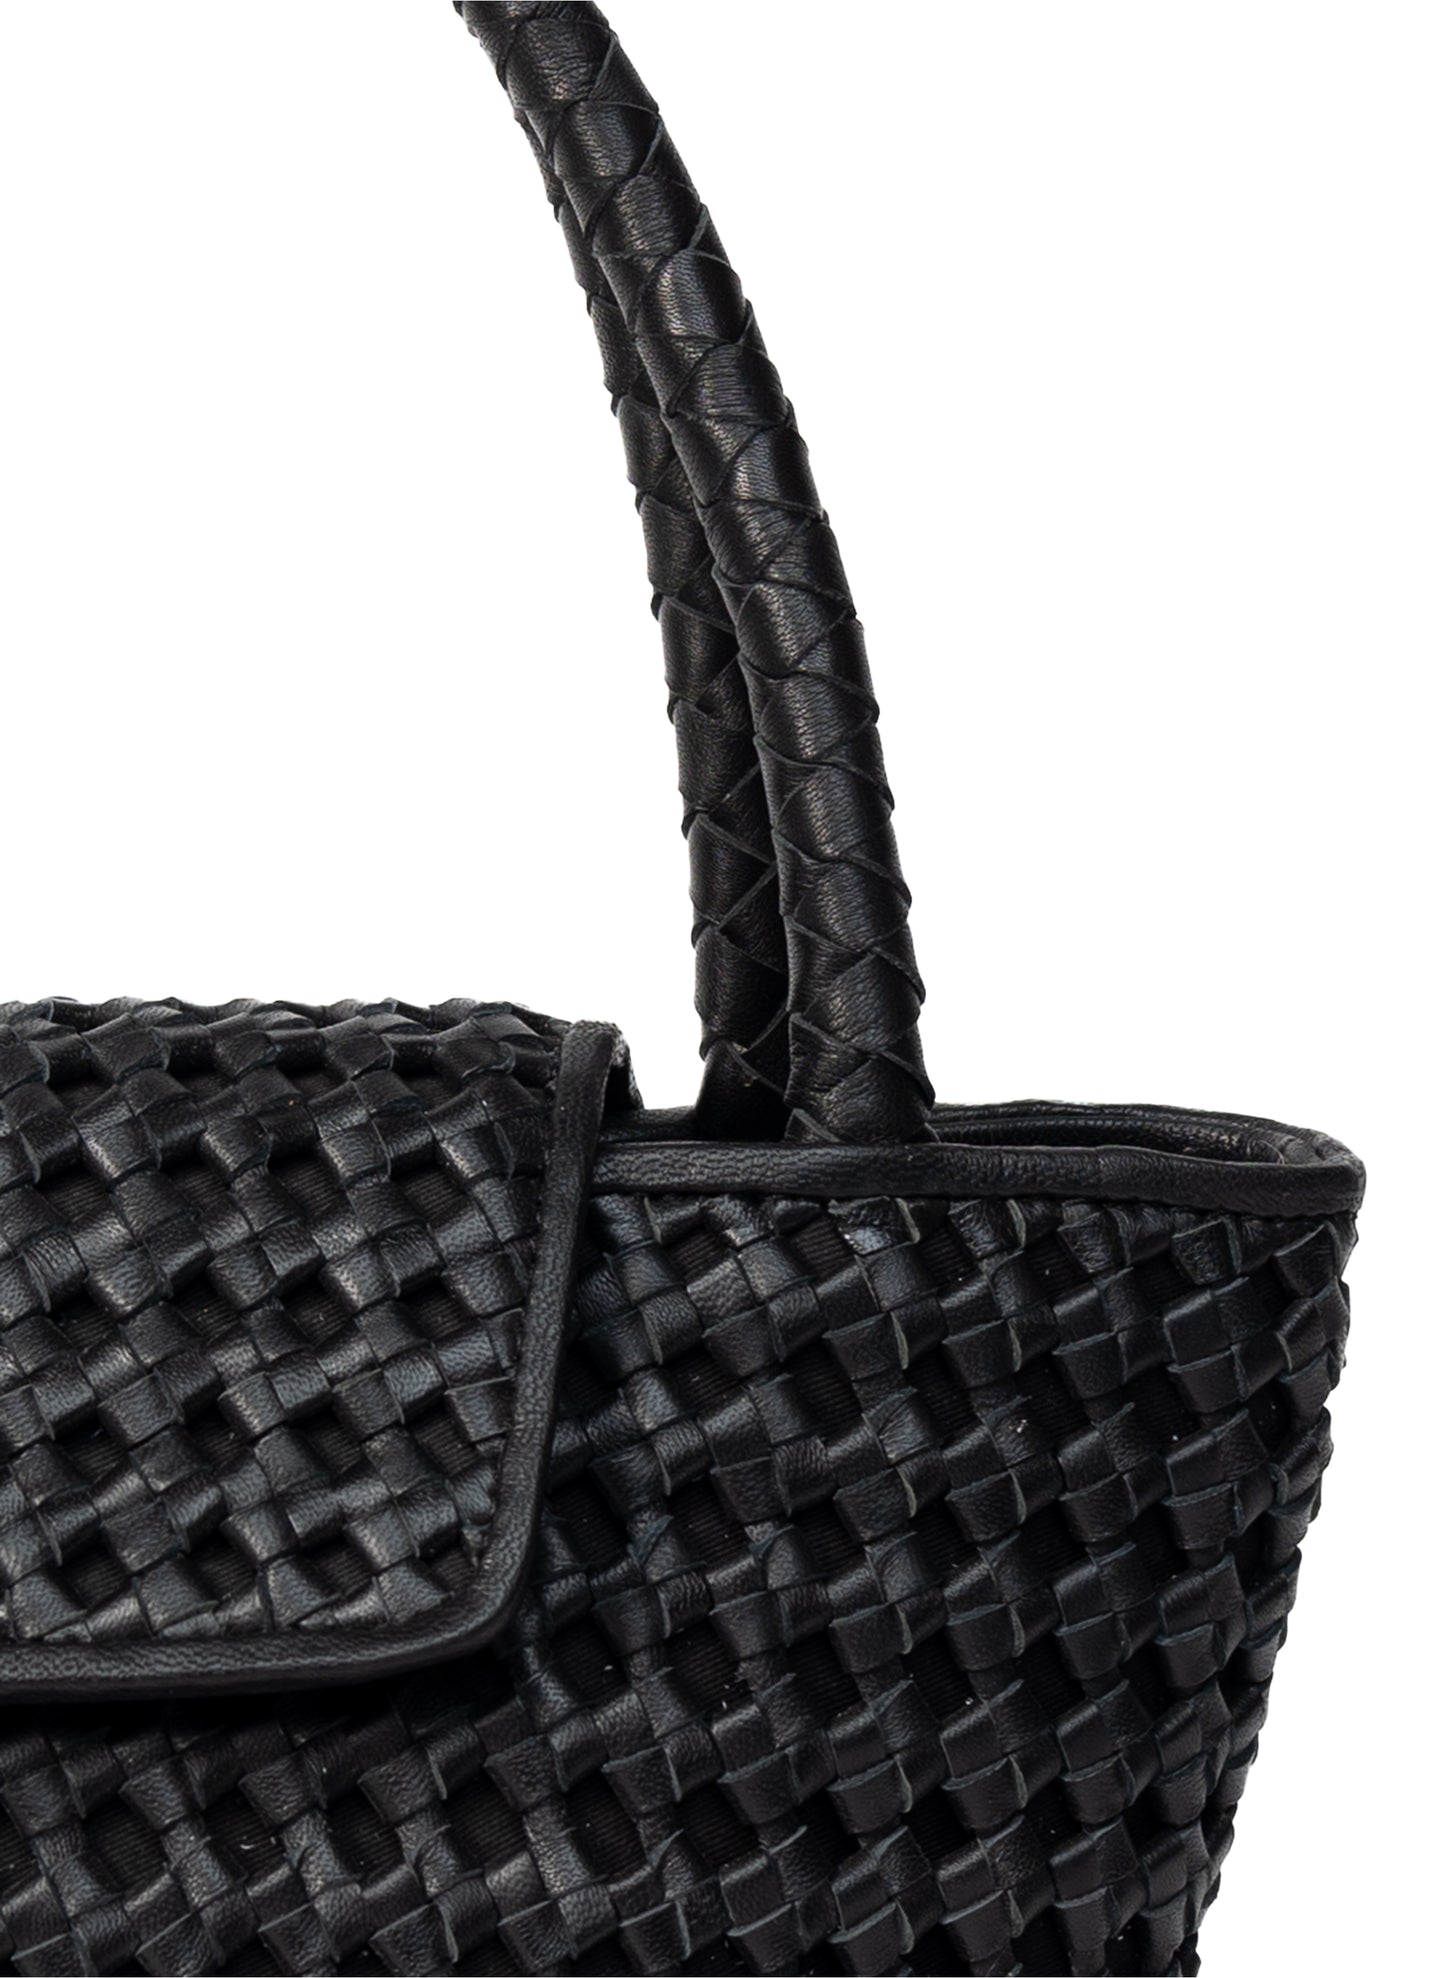 Courrier Tote Woven Leather Black / Pre order delivery in 3 weeks